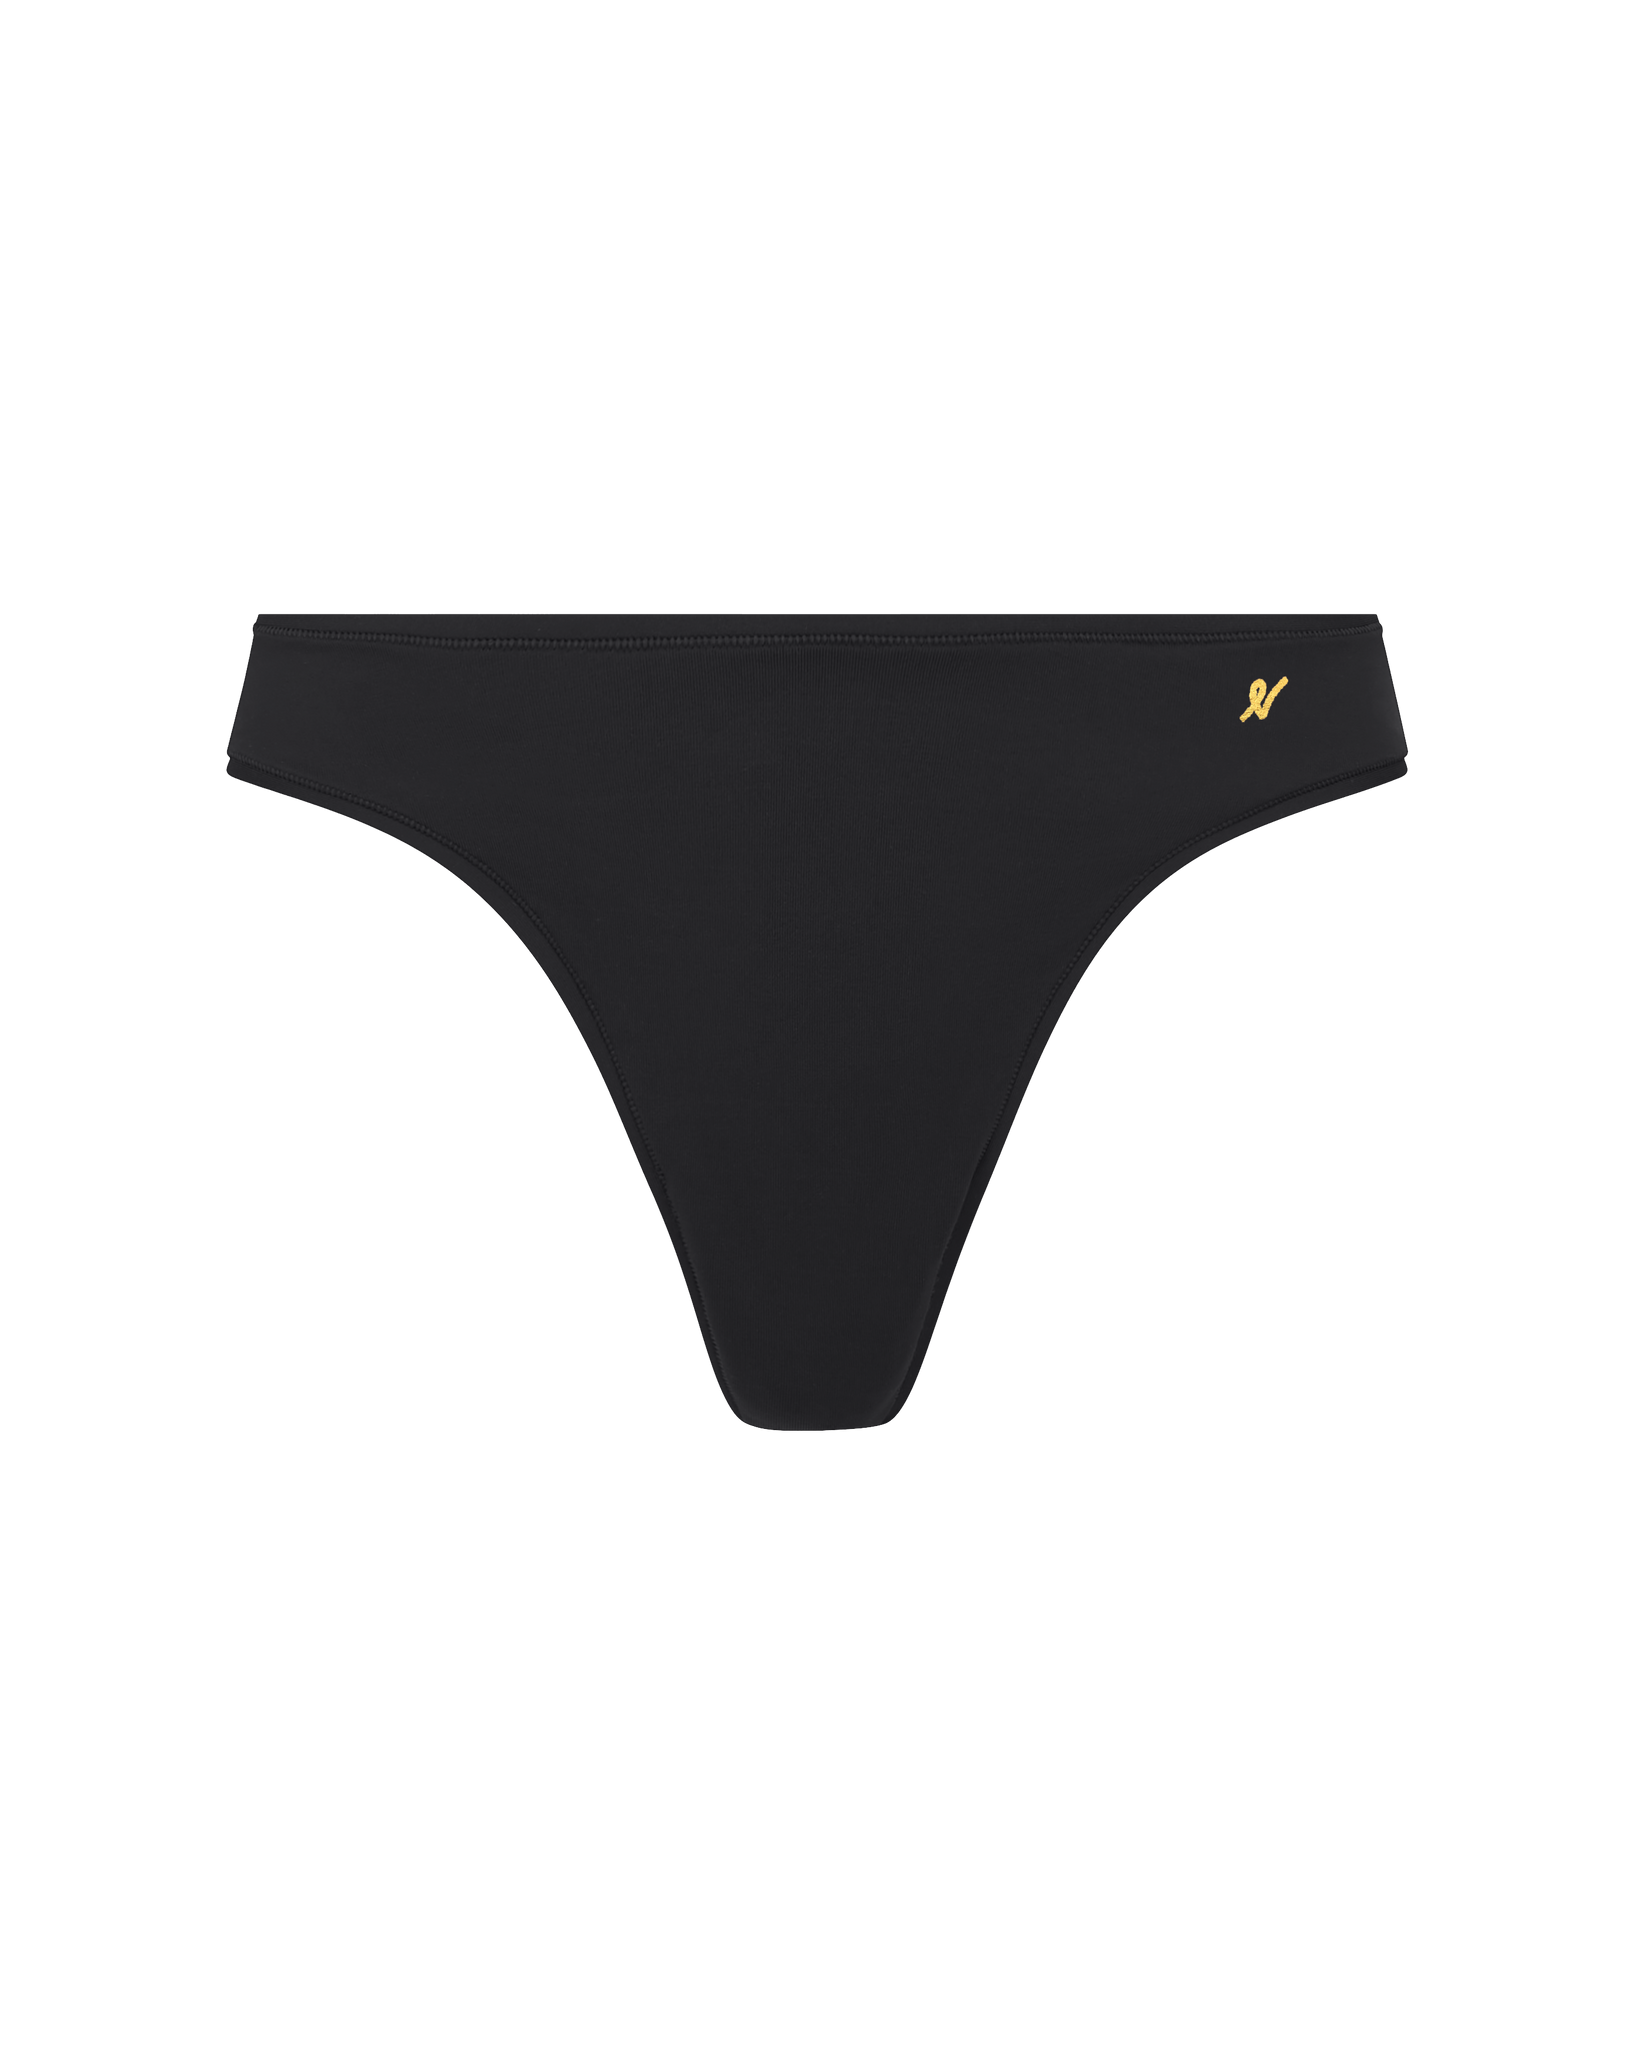 The Stretch Dipped Thong Bundle 3 Pack - Bare 01/Bare 03/Black